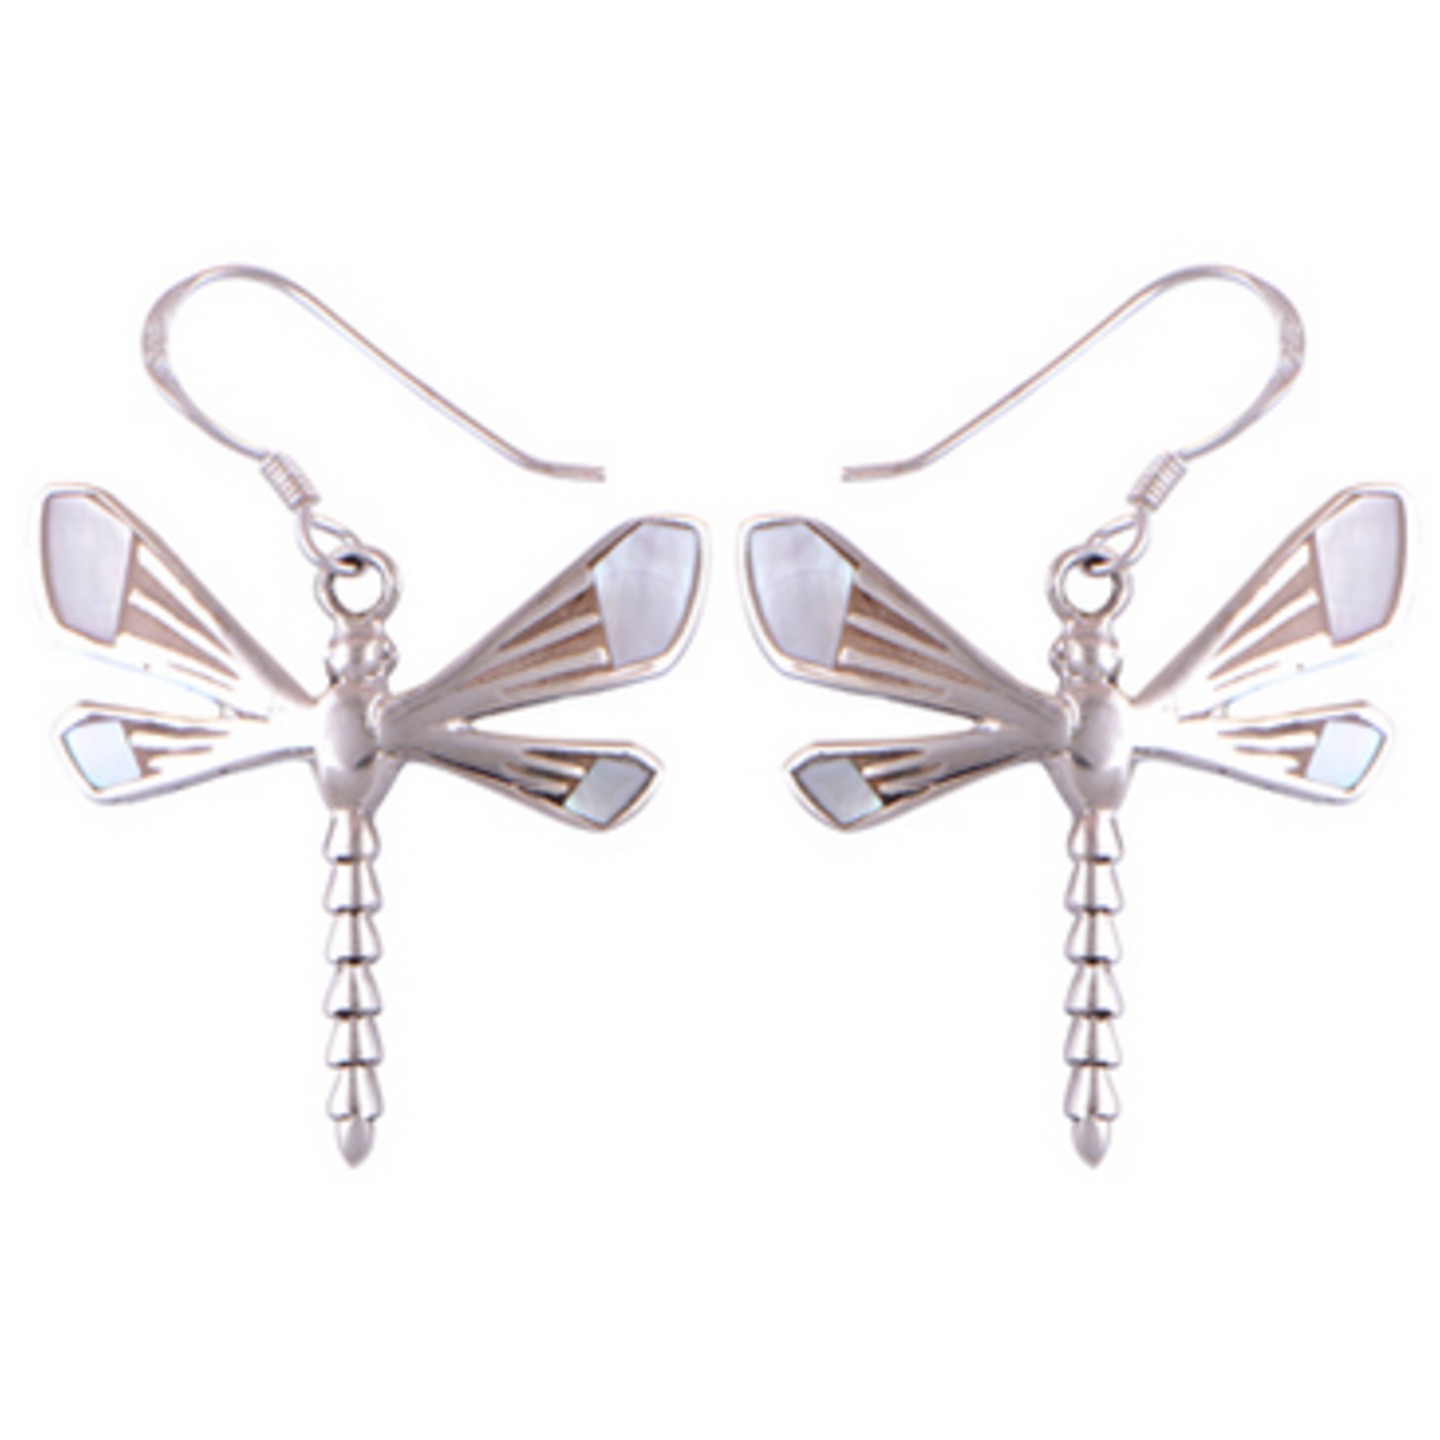 The Dragonfly Silver Earring